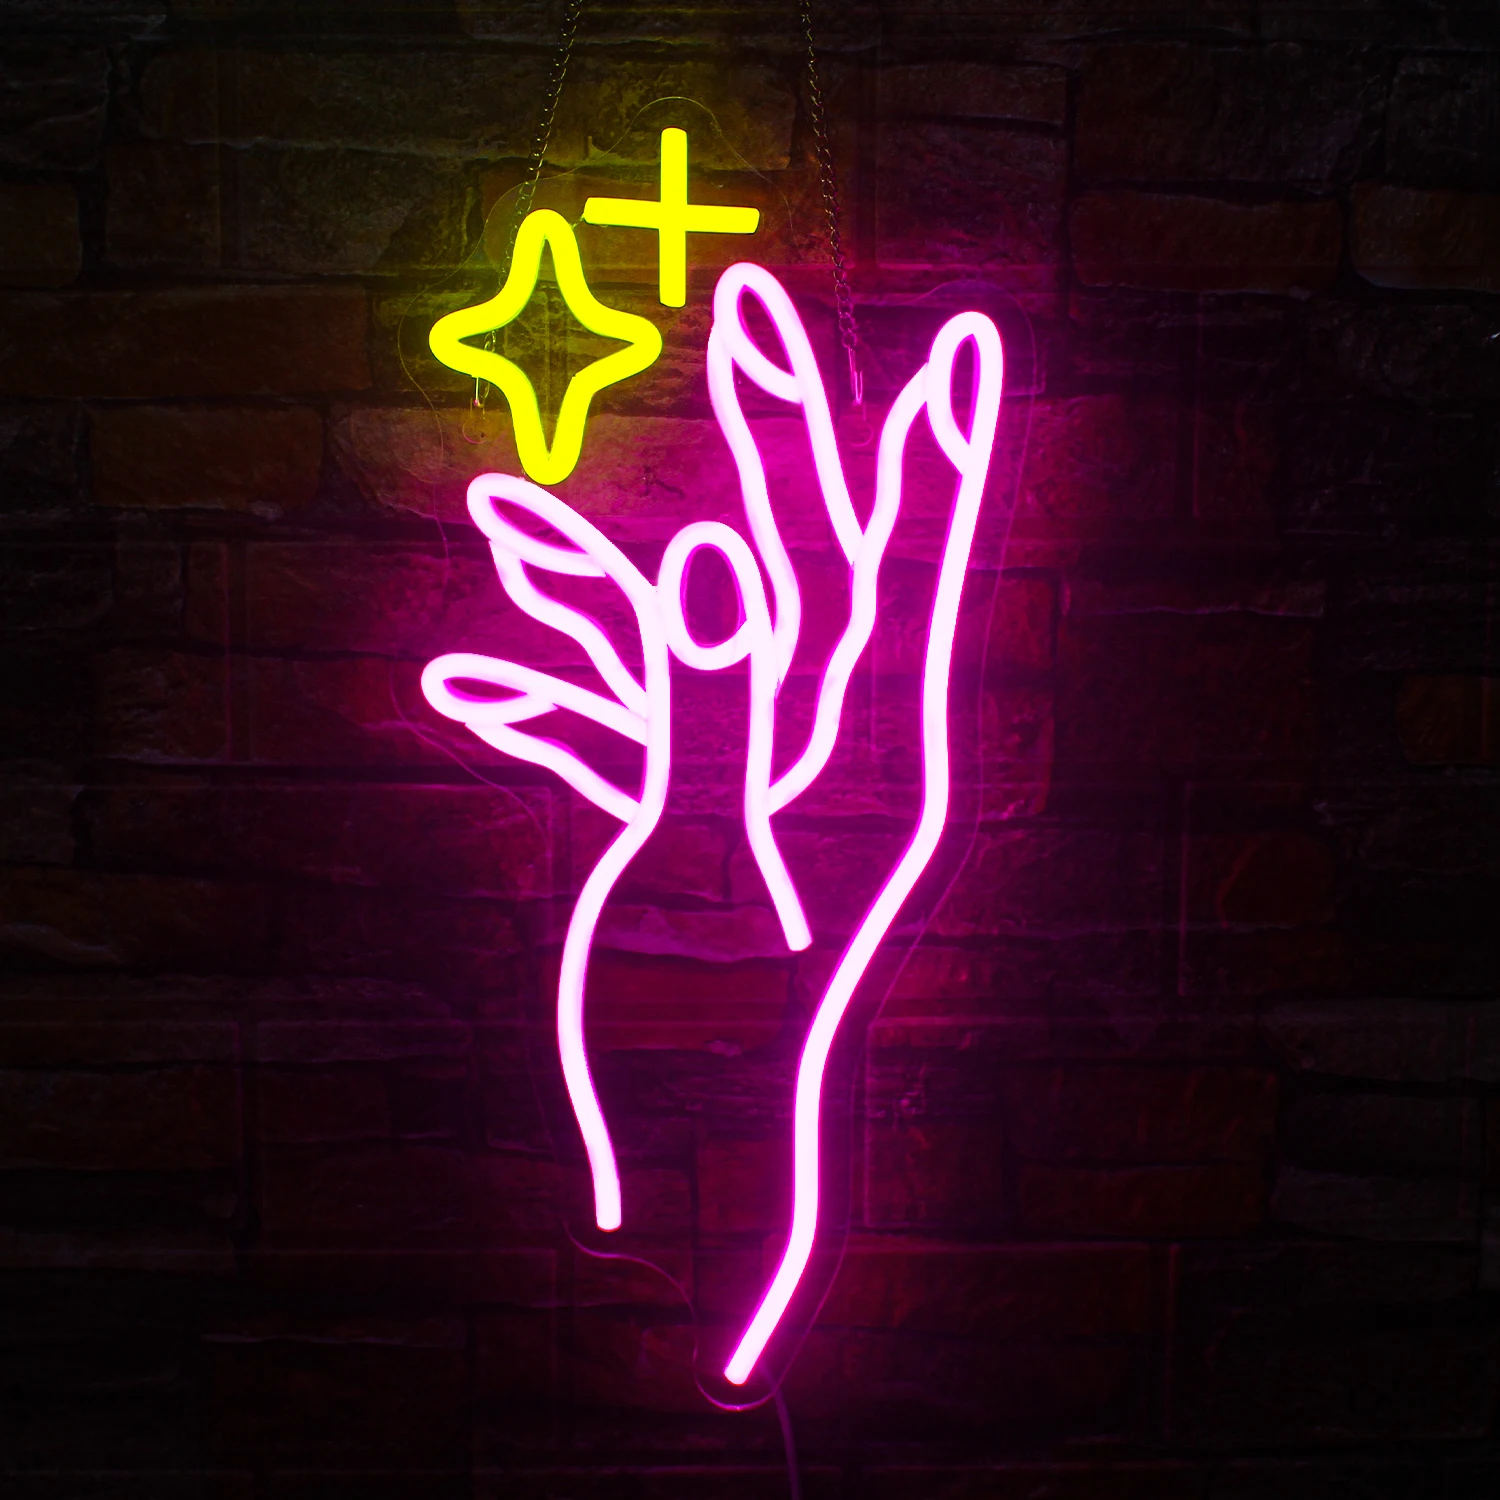 Yellow Star Hand Neon Sign Pink Nail Led Signs Wall Decor for Bedroom Girls Room Nail Salon Beauty Room Decoration Led Neon wanxing hair salon led neon sign lights barbershop acrylic hanging party clup aesthetic room home barber shop wall decoration